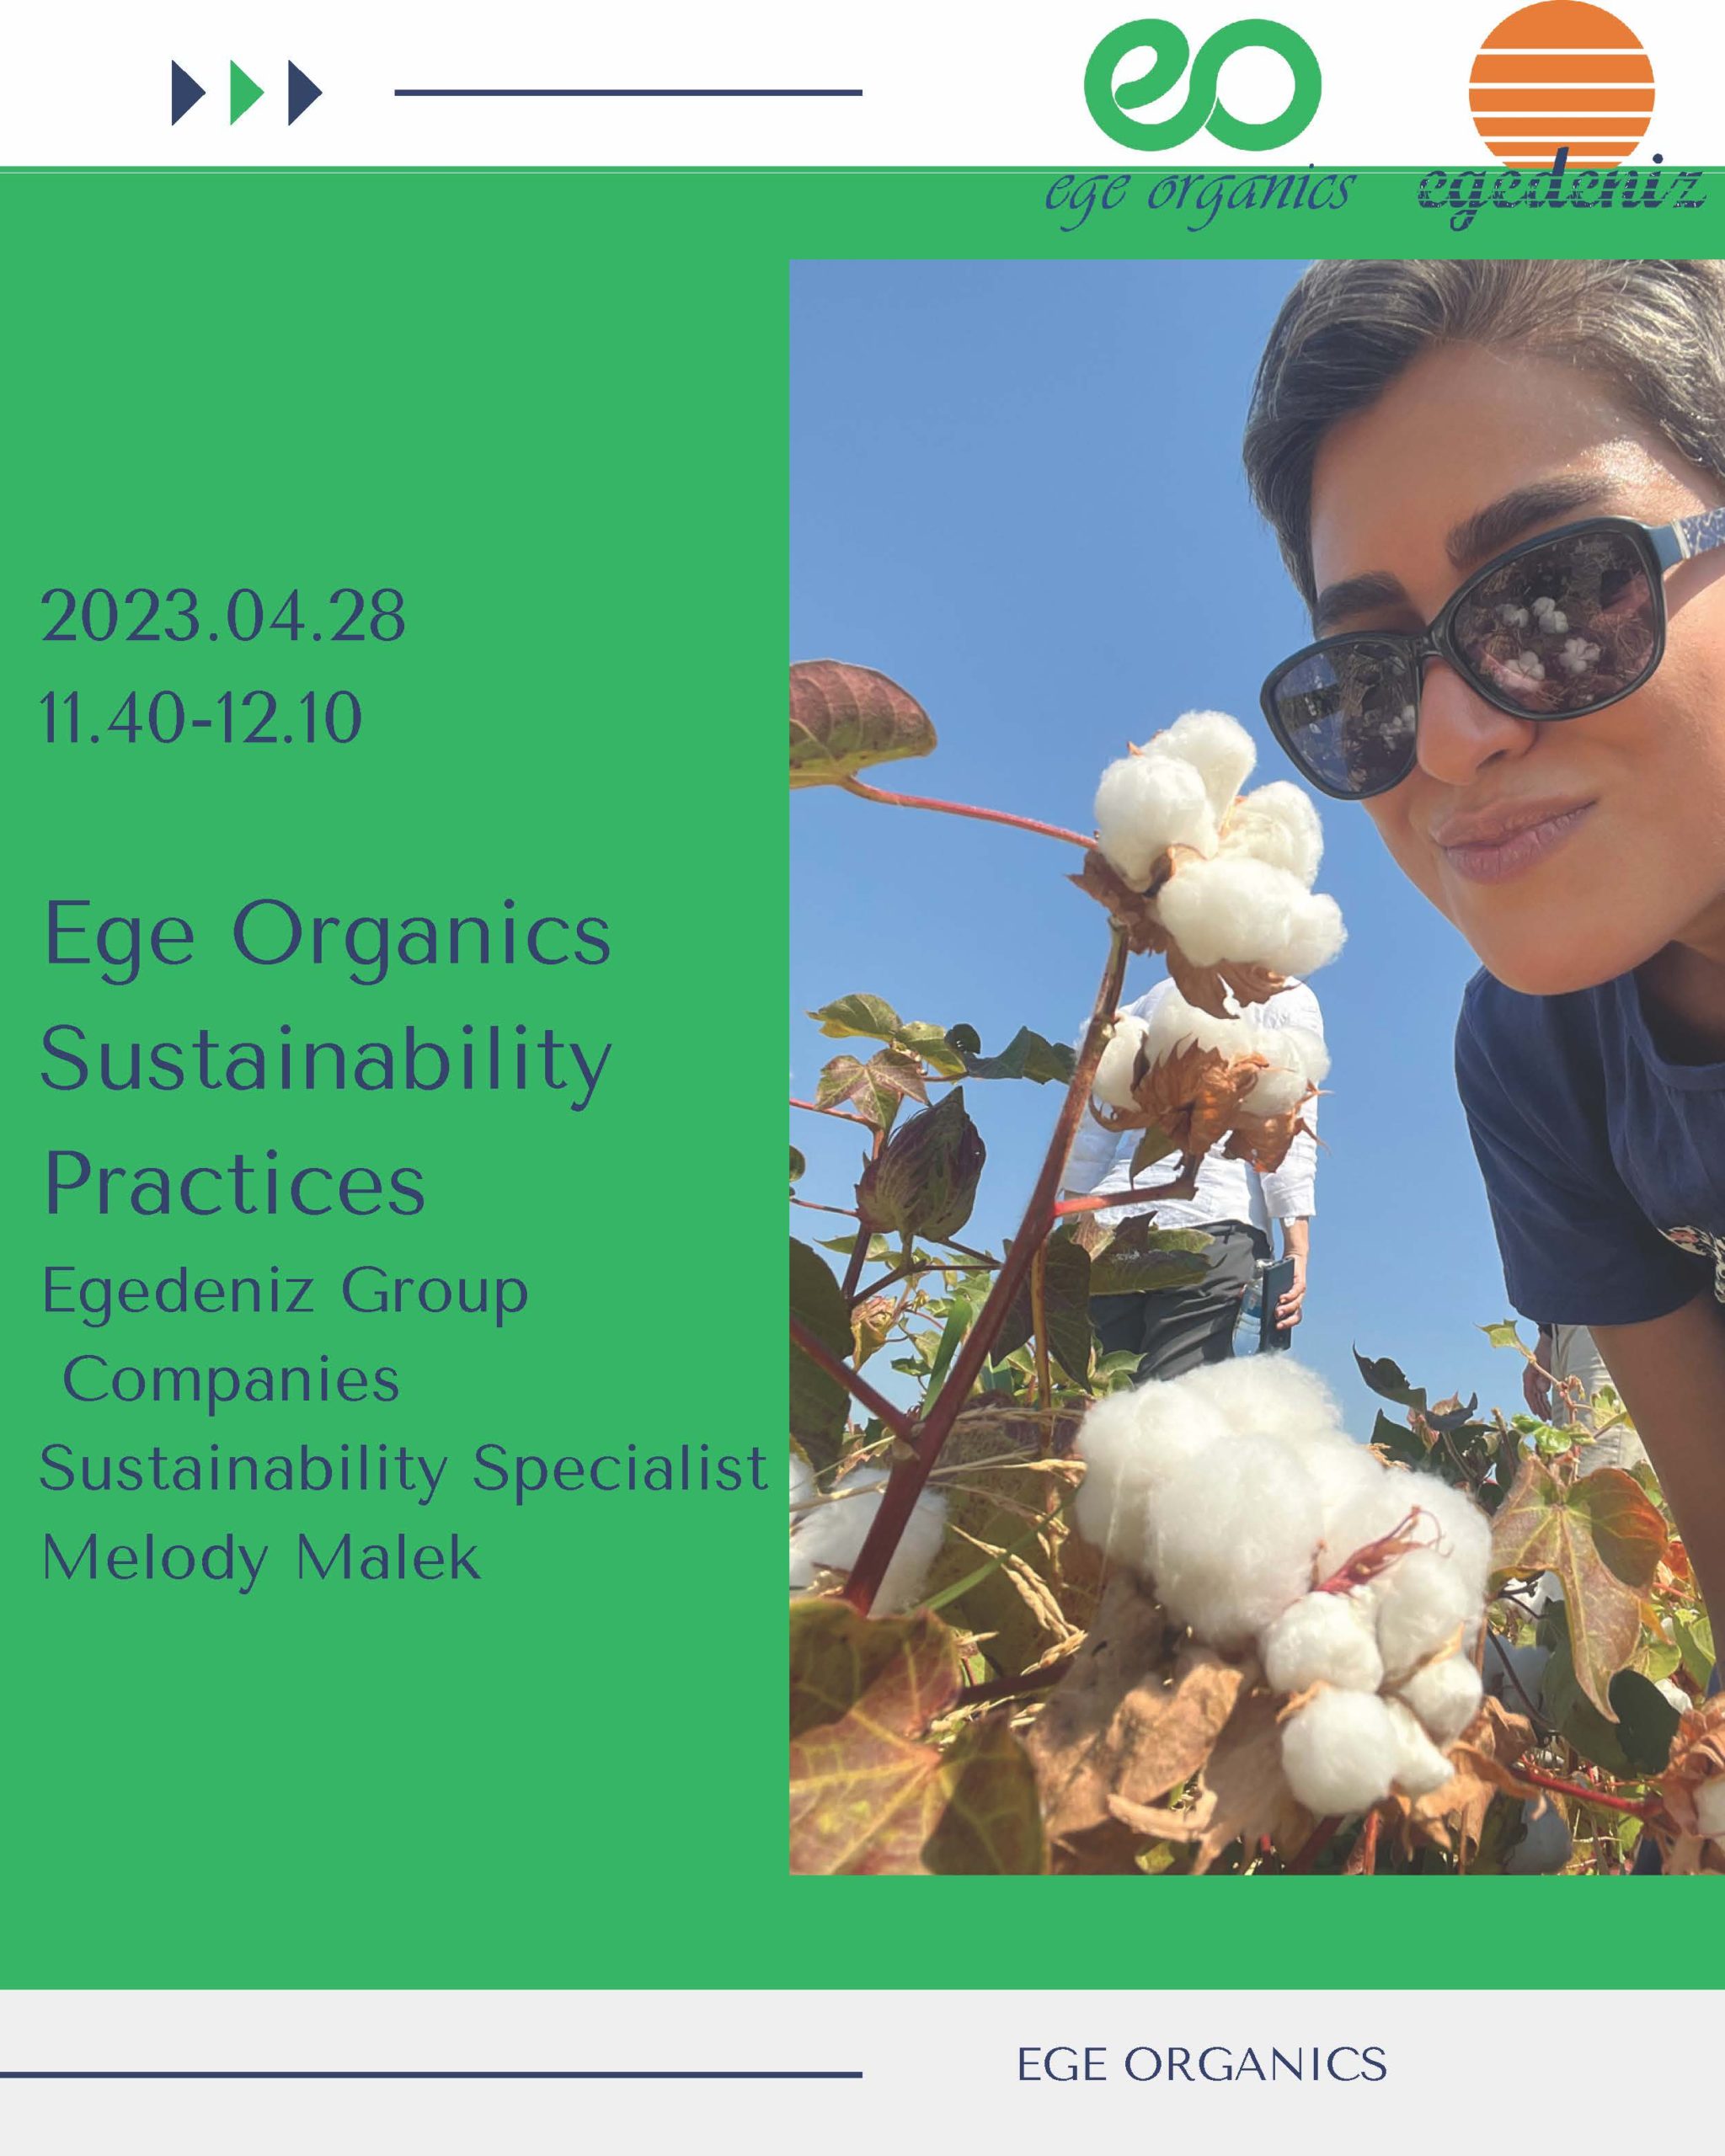 Sustainability Practices in Providing Sustainable Raw Materials: Egedeniz Group's Focus on Linen Hemp Blends and Regenerative Practices